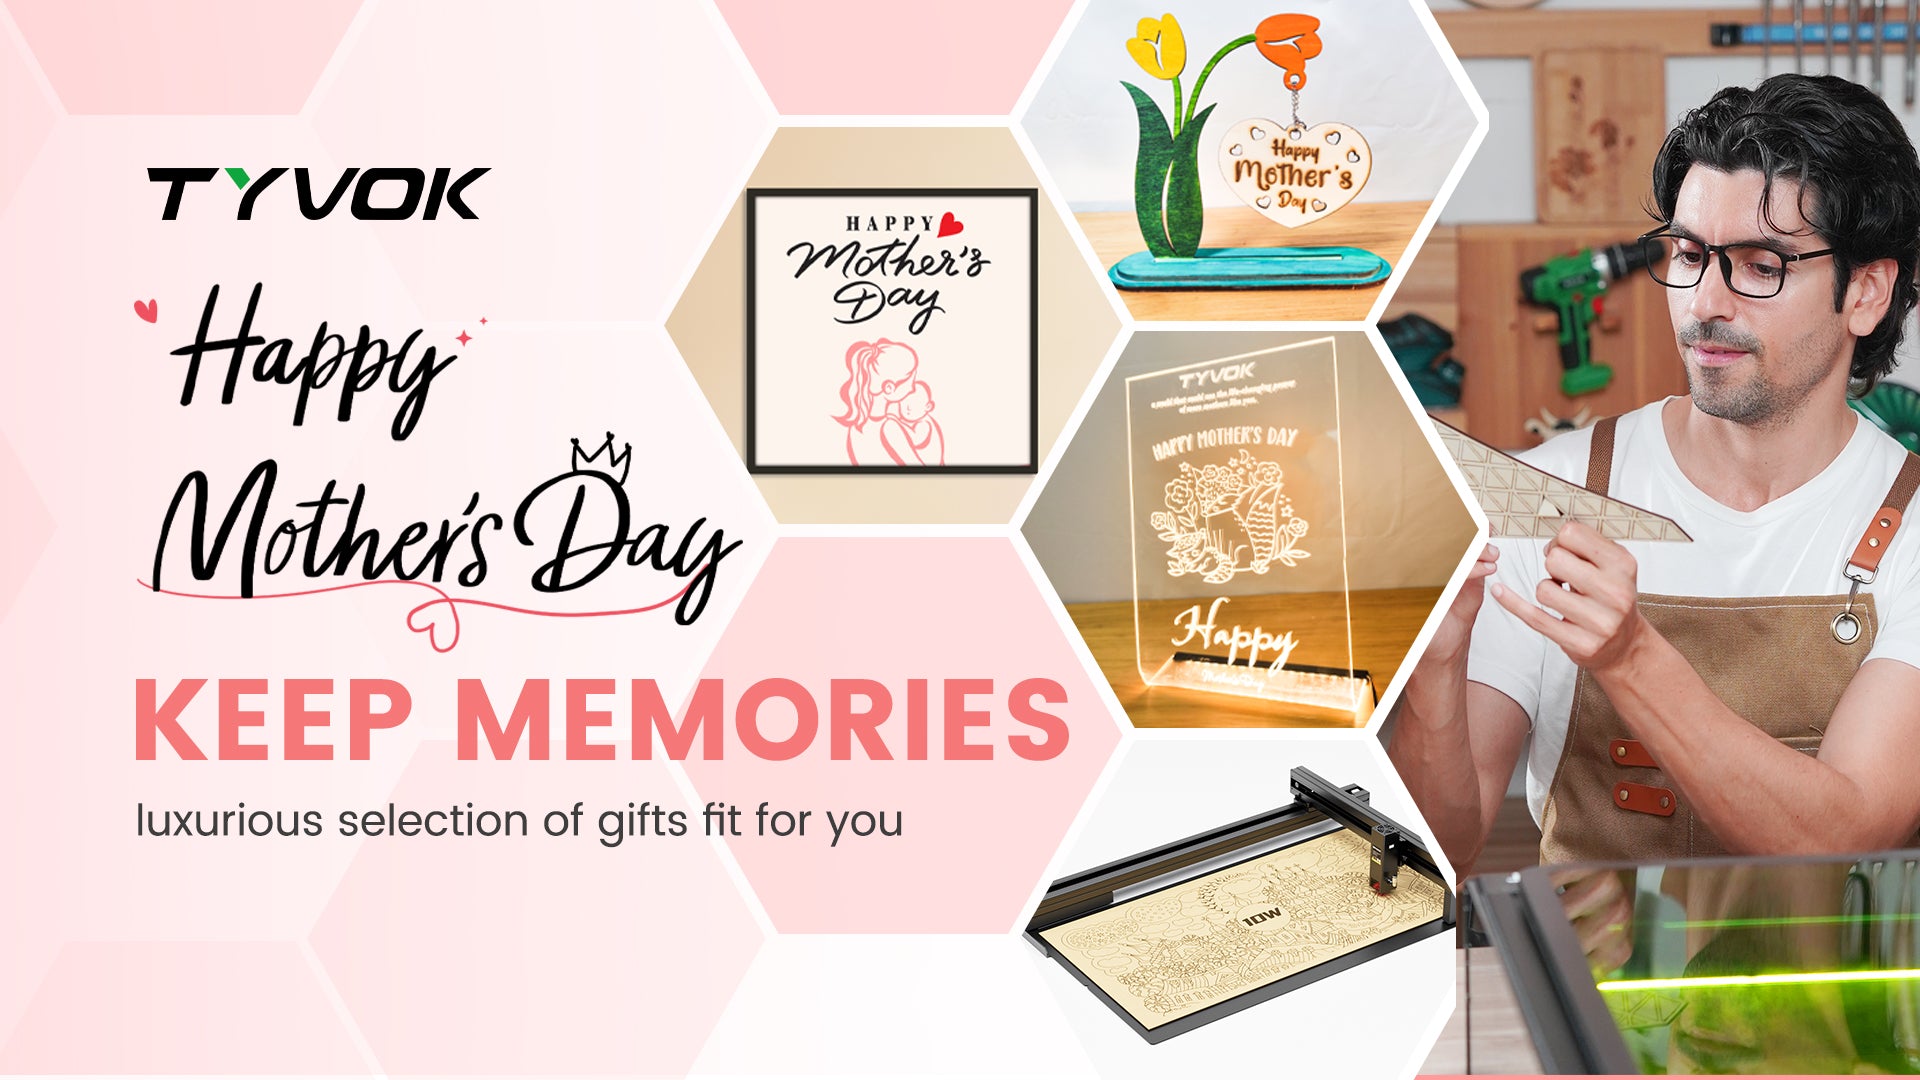 Happy Mother's Day! Last Call for Discounts!